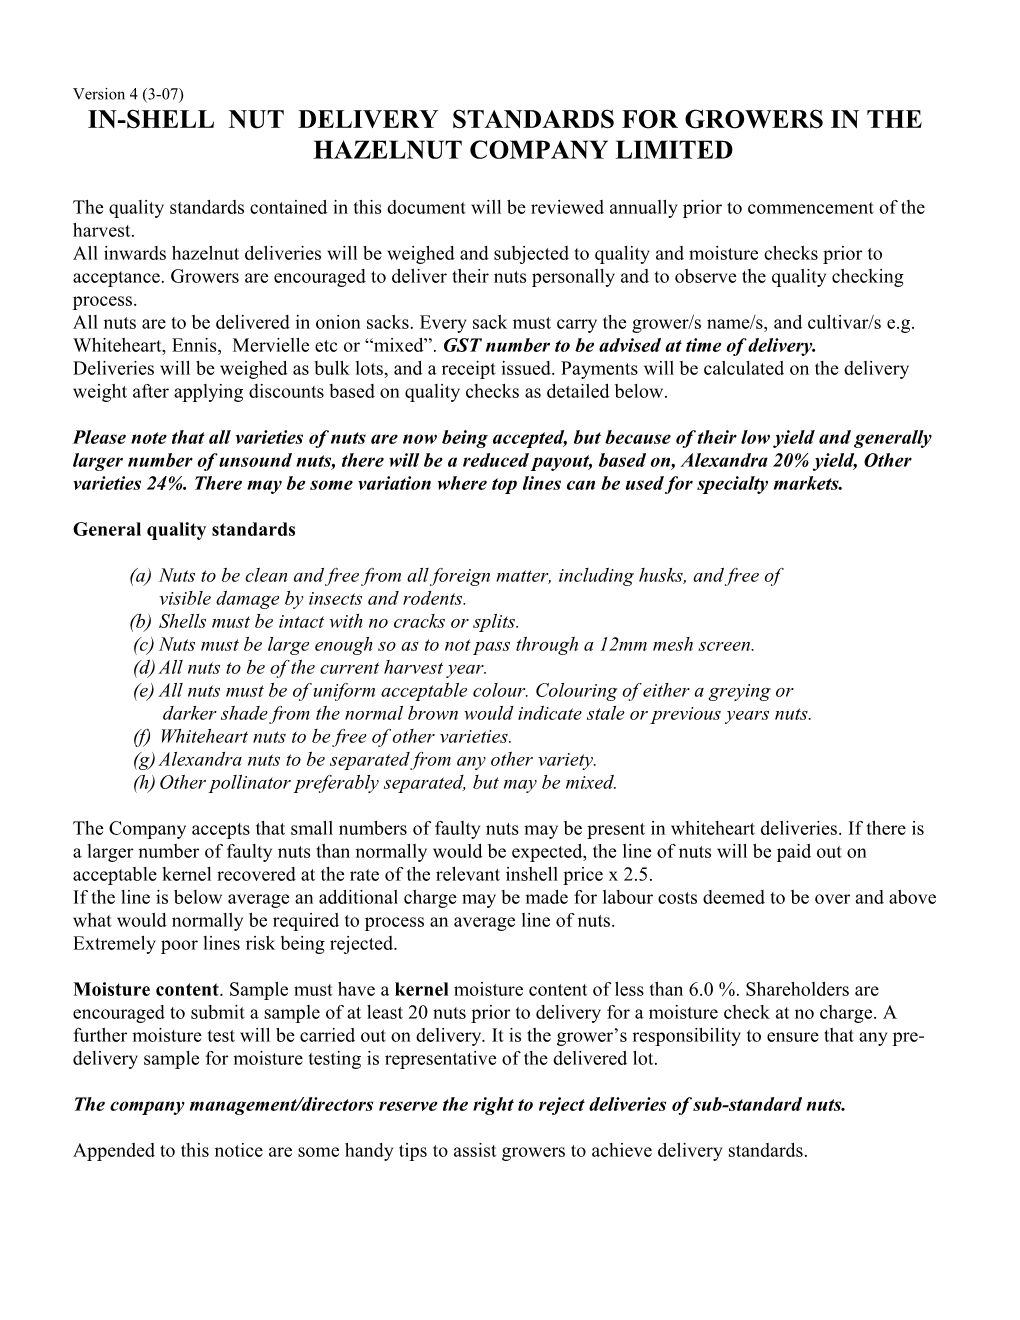 Discussion Document for the Hazelnut Company Agm 30/6/02